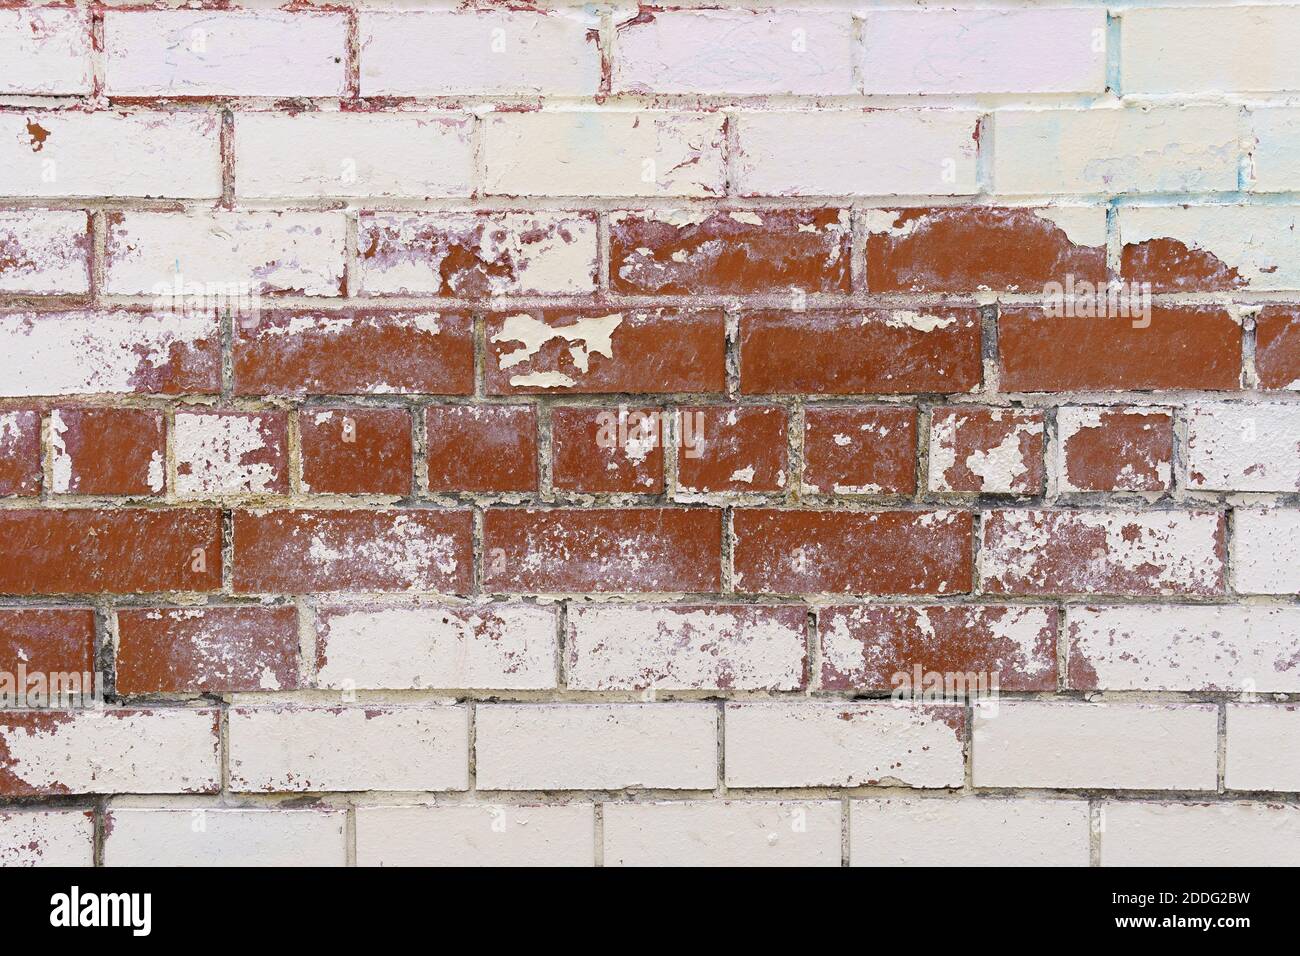 Brick wall textures. Painted problem wall surfaces. Red Stone Background. Worn facade of the building with damaged plaster. Stock Photo